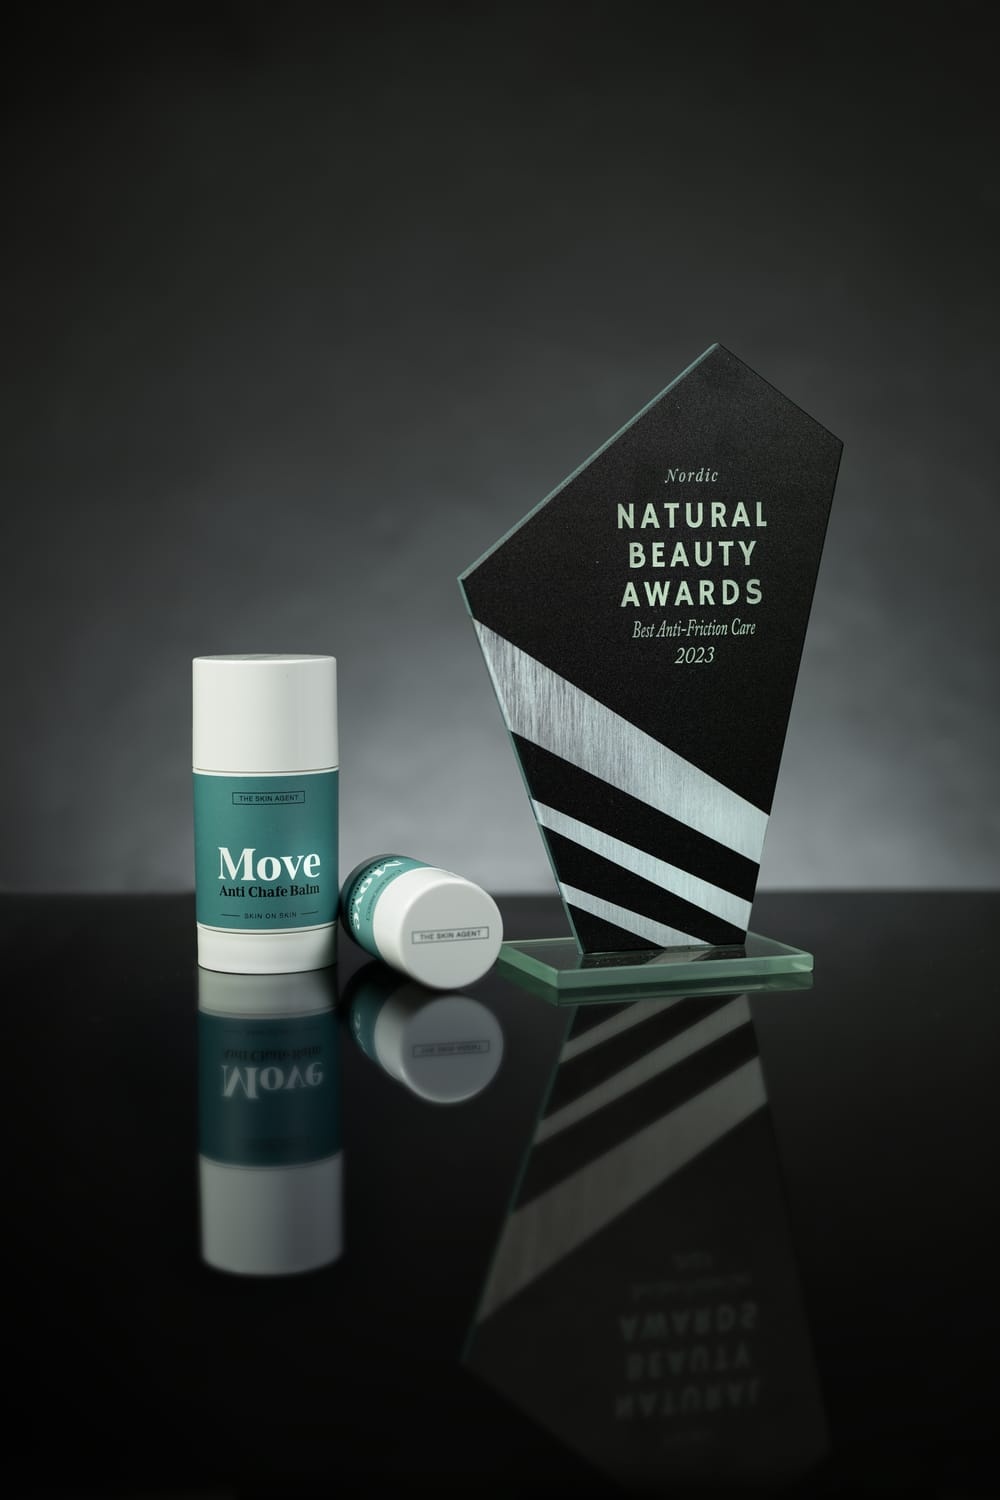 Move Anti Chafe Balm with trophy for Best Anti Friction Care 2023 by Nordic Natural Beauty Awards